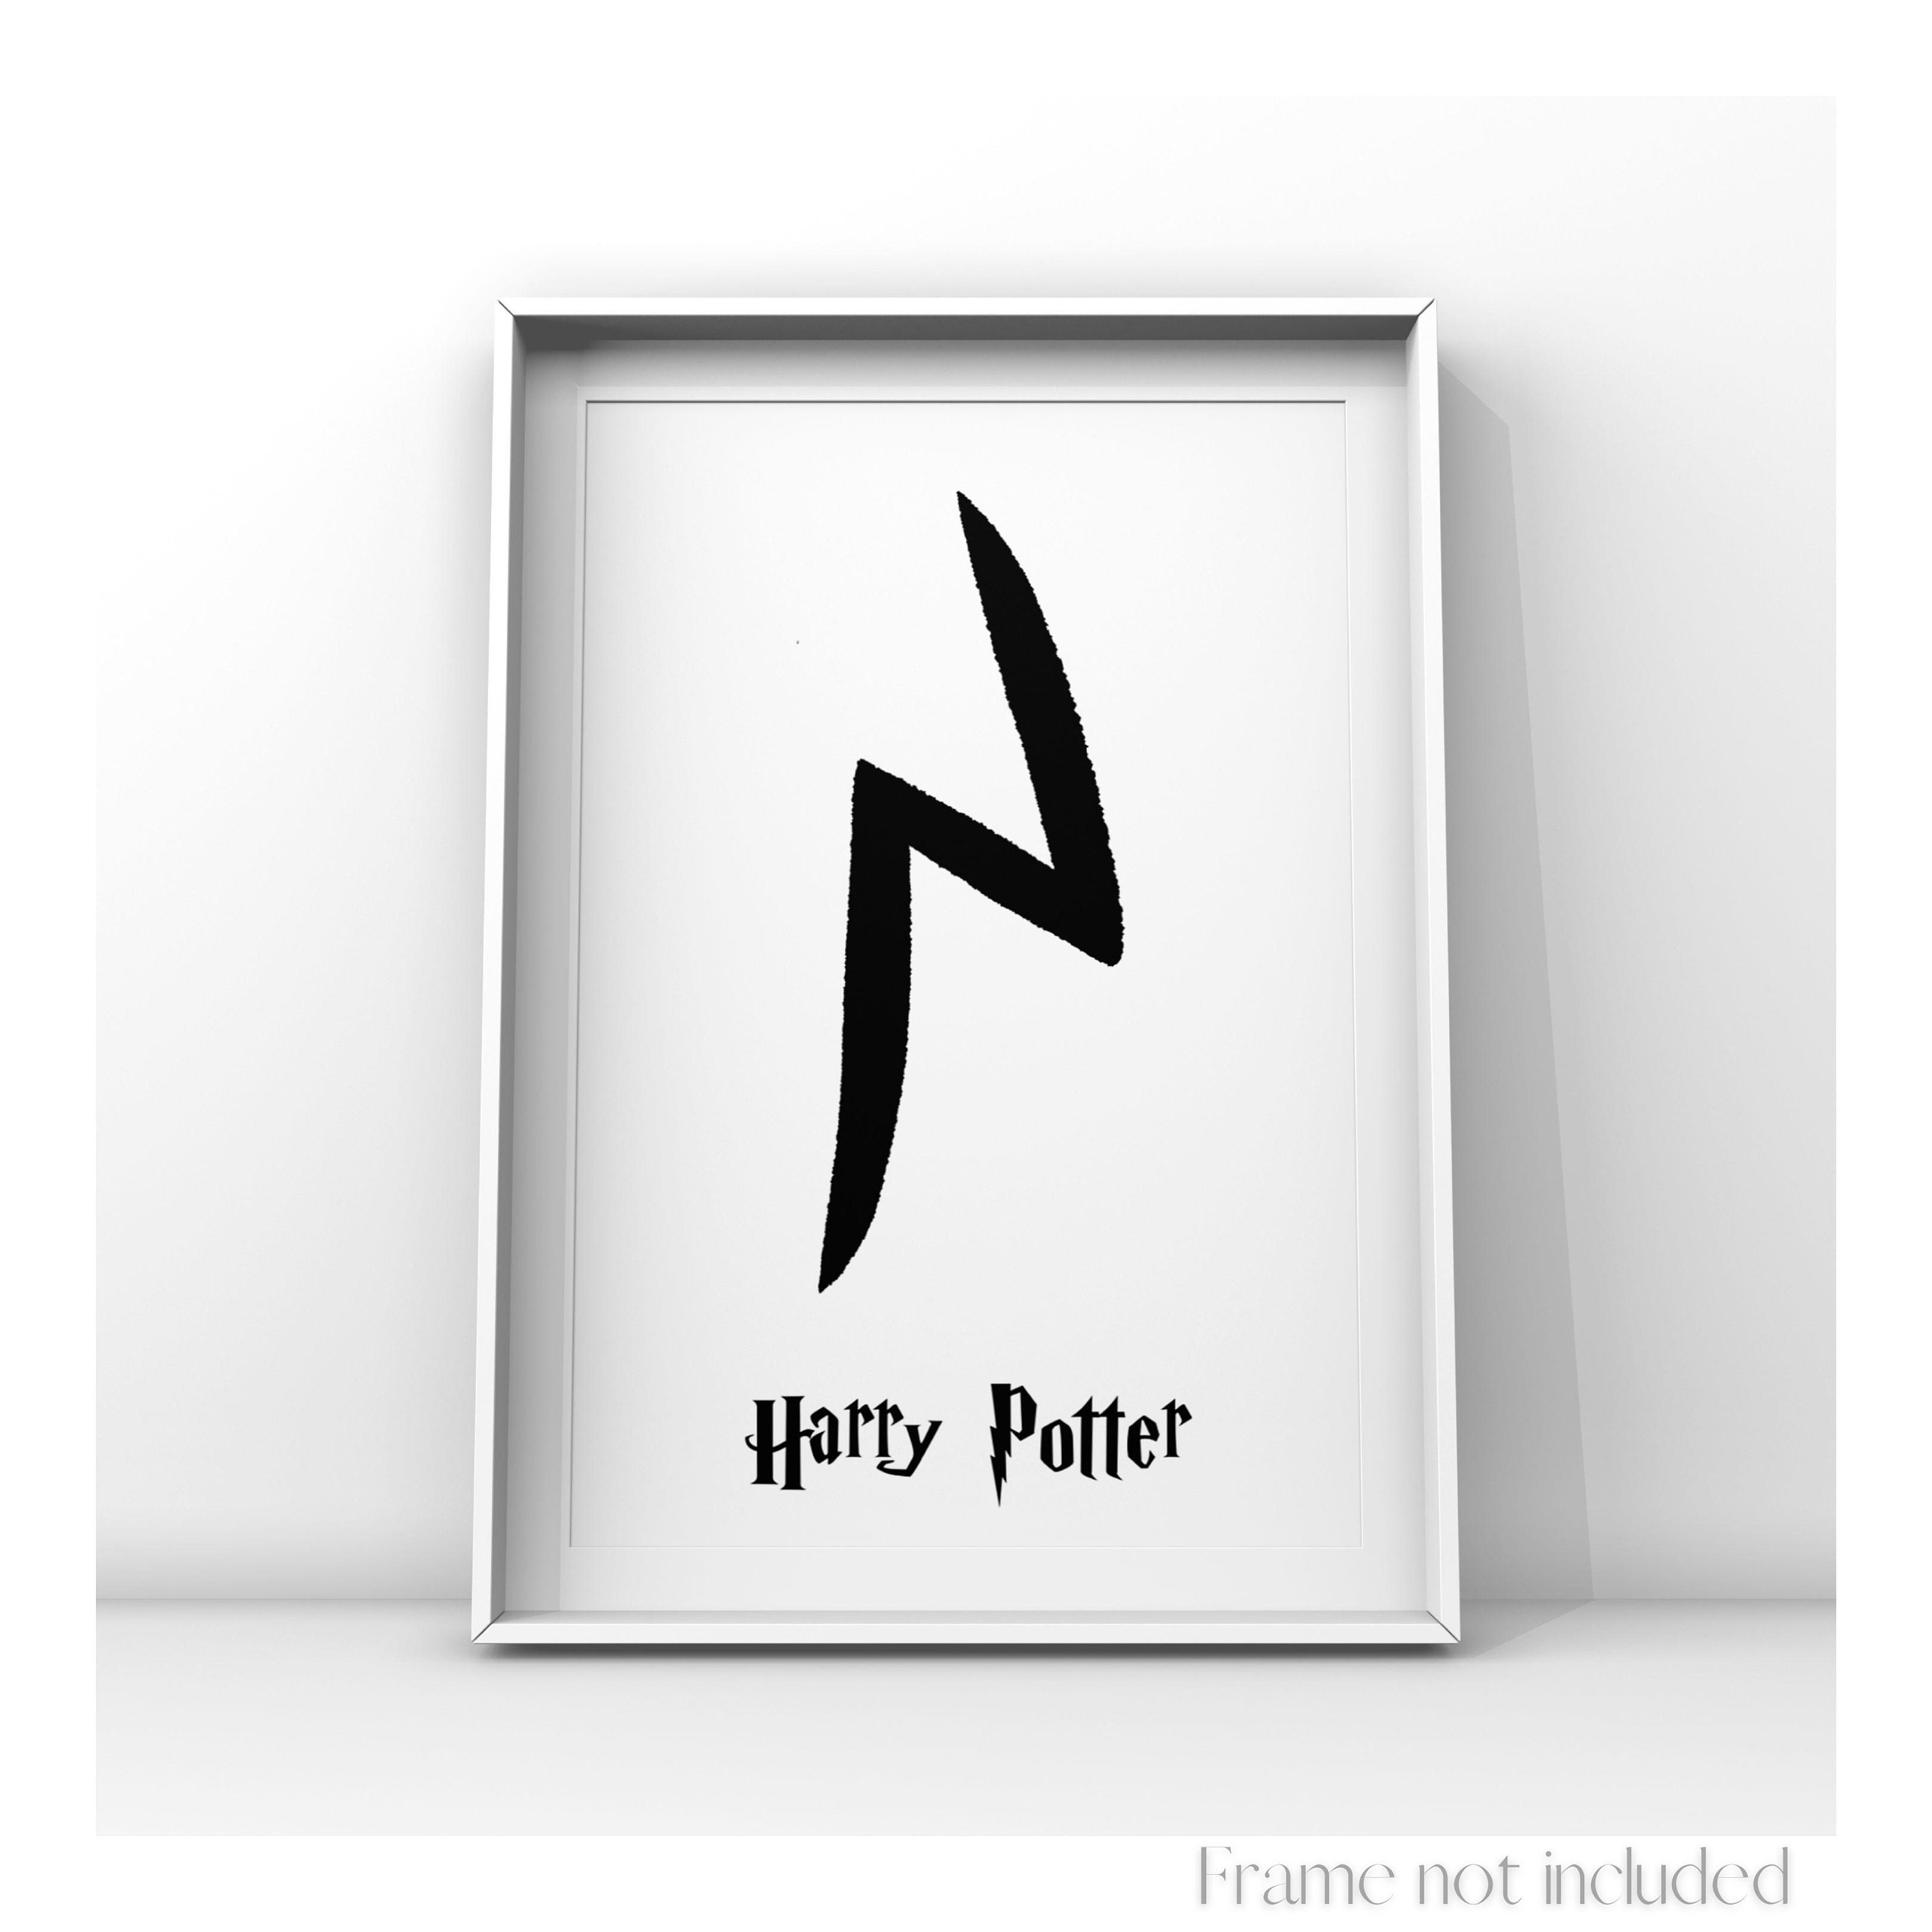 Harry Potter Movie Poster Collection Bundle - Set of 8 - 11x17 13x19 | NEW  USA 